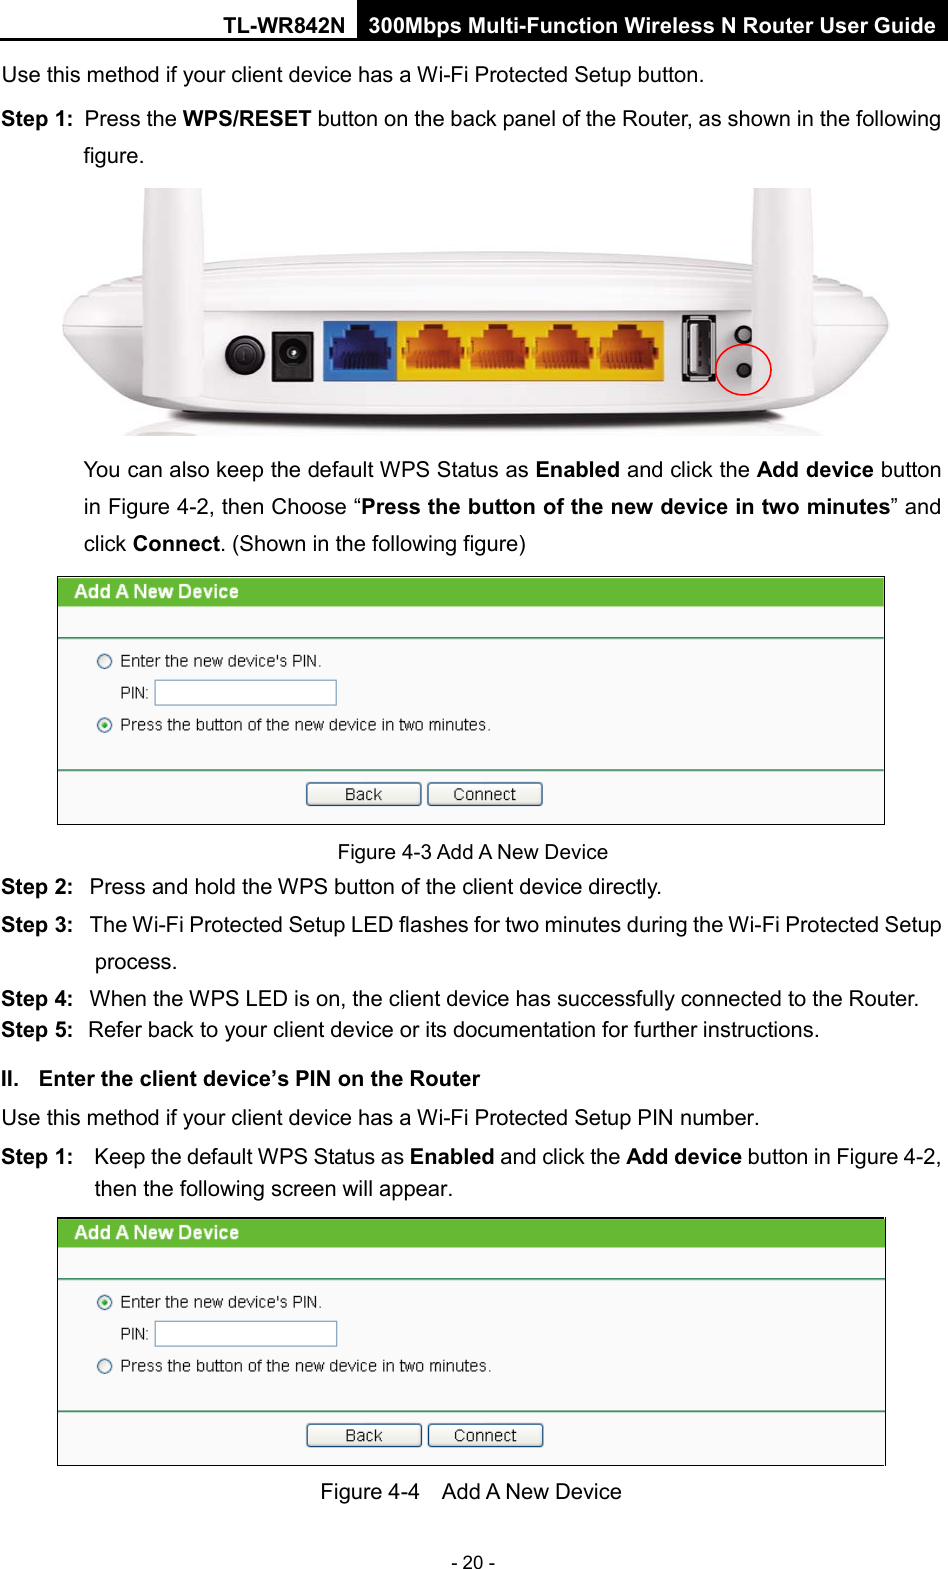 TL-WR842N 300Mbps Multi-Function Wireless N Router User Guide  - 20 - Use this method if your client device has a Wi-Fi Protected Setup button. Step 1: Press the WPS/RESET button on the back panel of the Router, as shown in the following figure.   You can also keep the default WPS Status as Enabled and click the Add device button in Figure 4-2, then Choose “Press the button of the new device in two minutes” and click Connect. (Shown in the following figure)  Figure 4-3 Add A New Device Step 2: Press and hold the WPS button of the client device directly.   Step 3: The Wi-Fi Protected Setup LED flashes for two minutes during the Wi-Fi Protected Setup process.   Step 4: When the WPS LED is on, the client device has successfully connected to the Router.   Step 5: Refer back to your client device or its documentation for further instructions.   II. Enter the client device’s PIN on the Router Use this method if your client device has a Wi-Fi Protected Setup PIN number. Step 1: Keep the default WPS Status as Enabled and click the Add device button in Figure 4-2, then the following screen will appear.    Figure 4-4  Add A New Device 